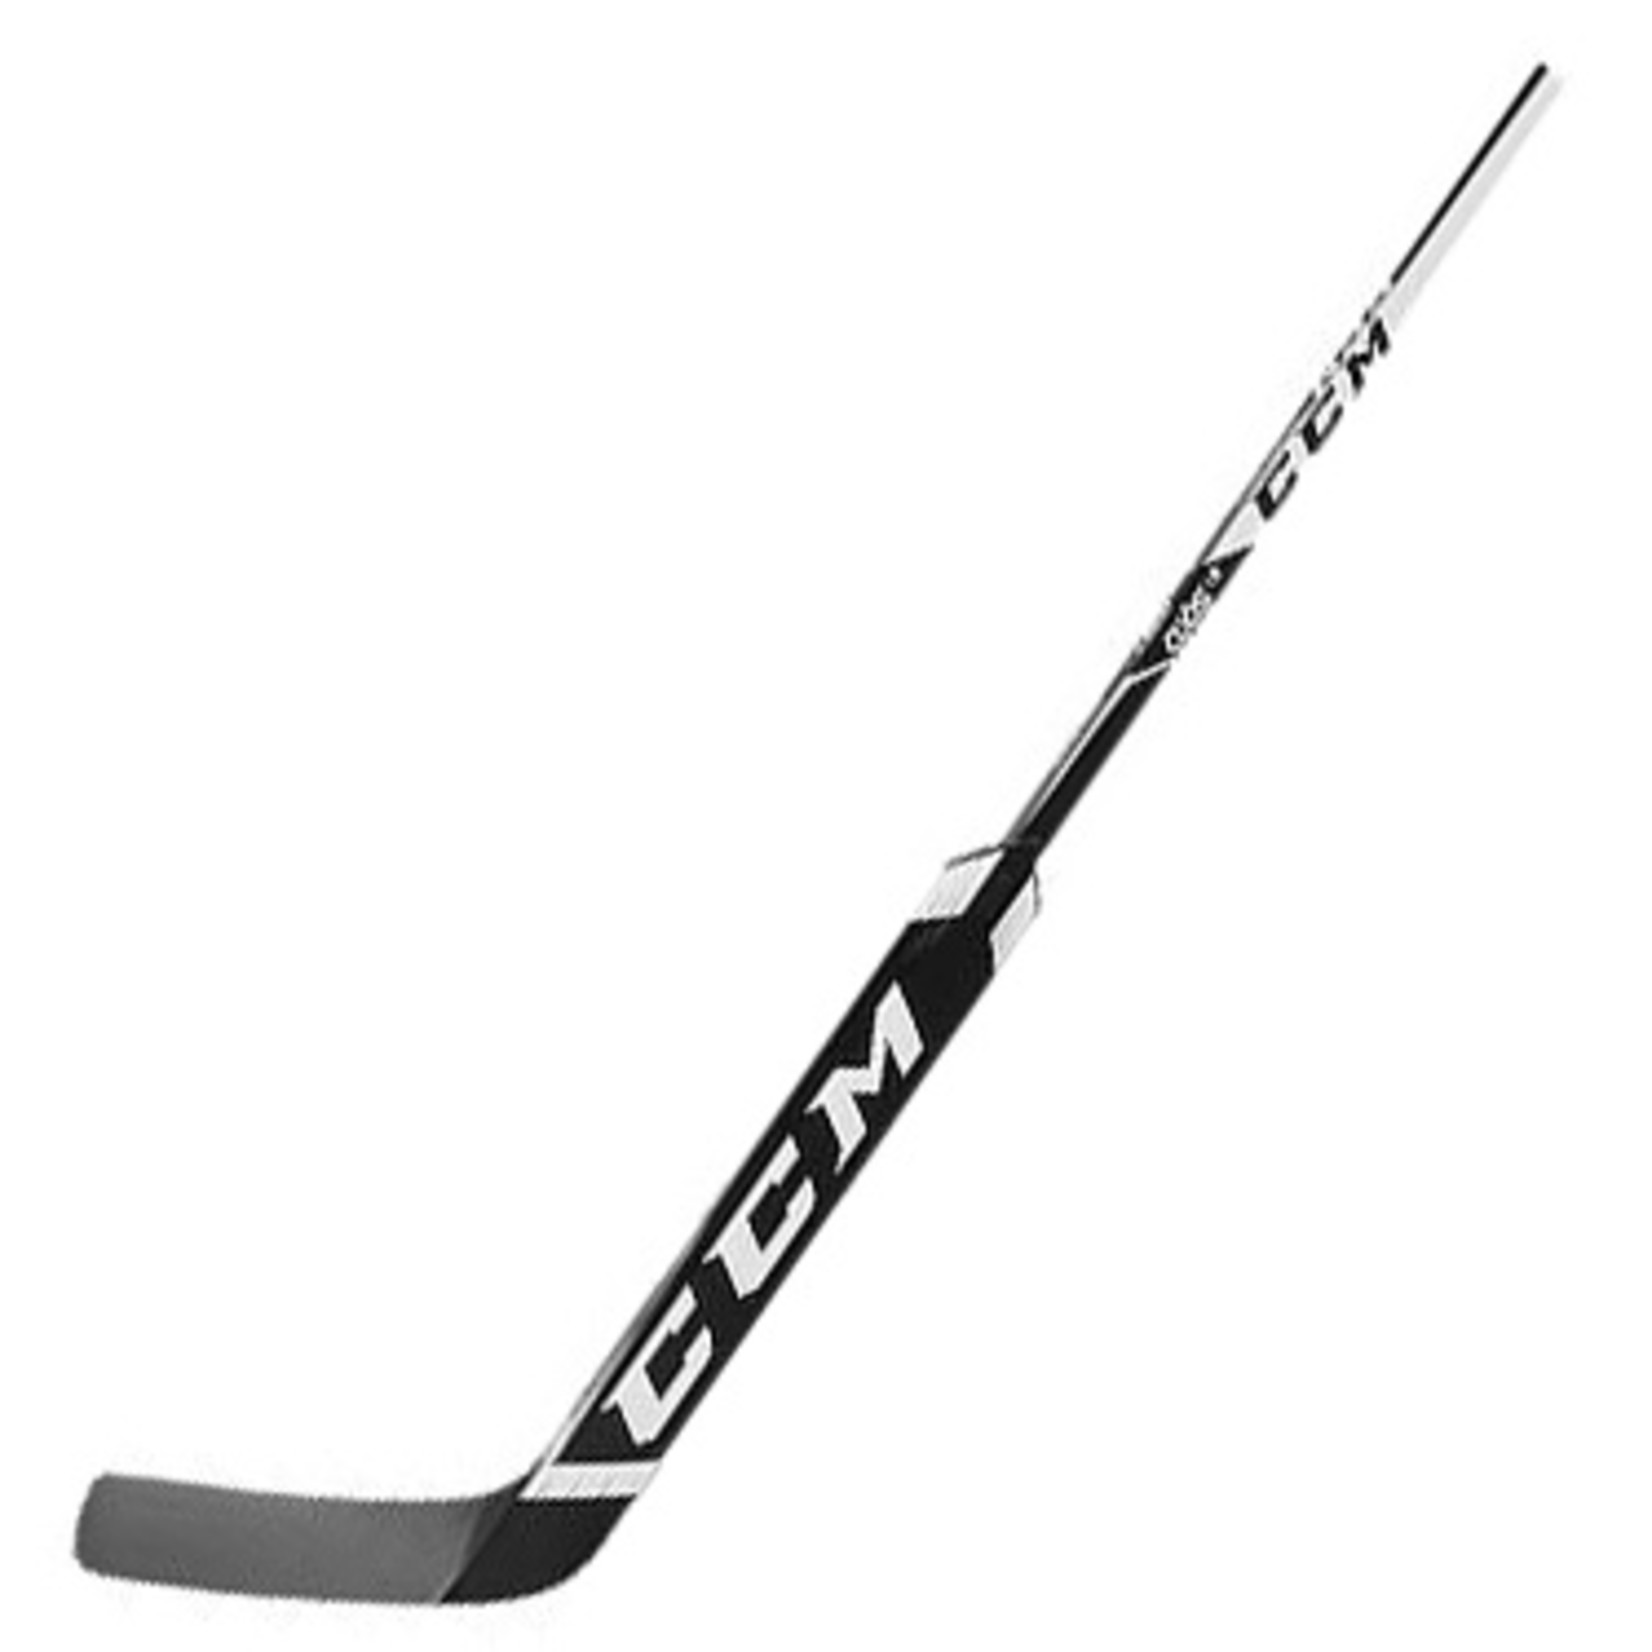 Axis 1.5 Goalie Stick - Crawford